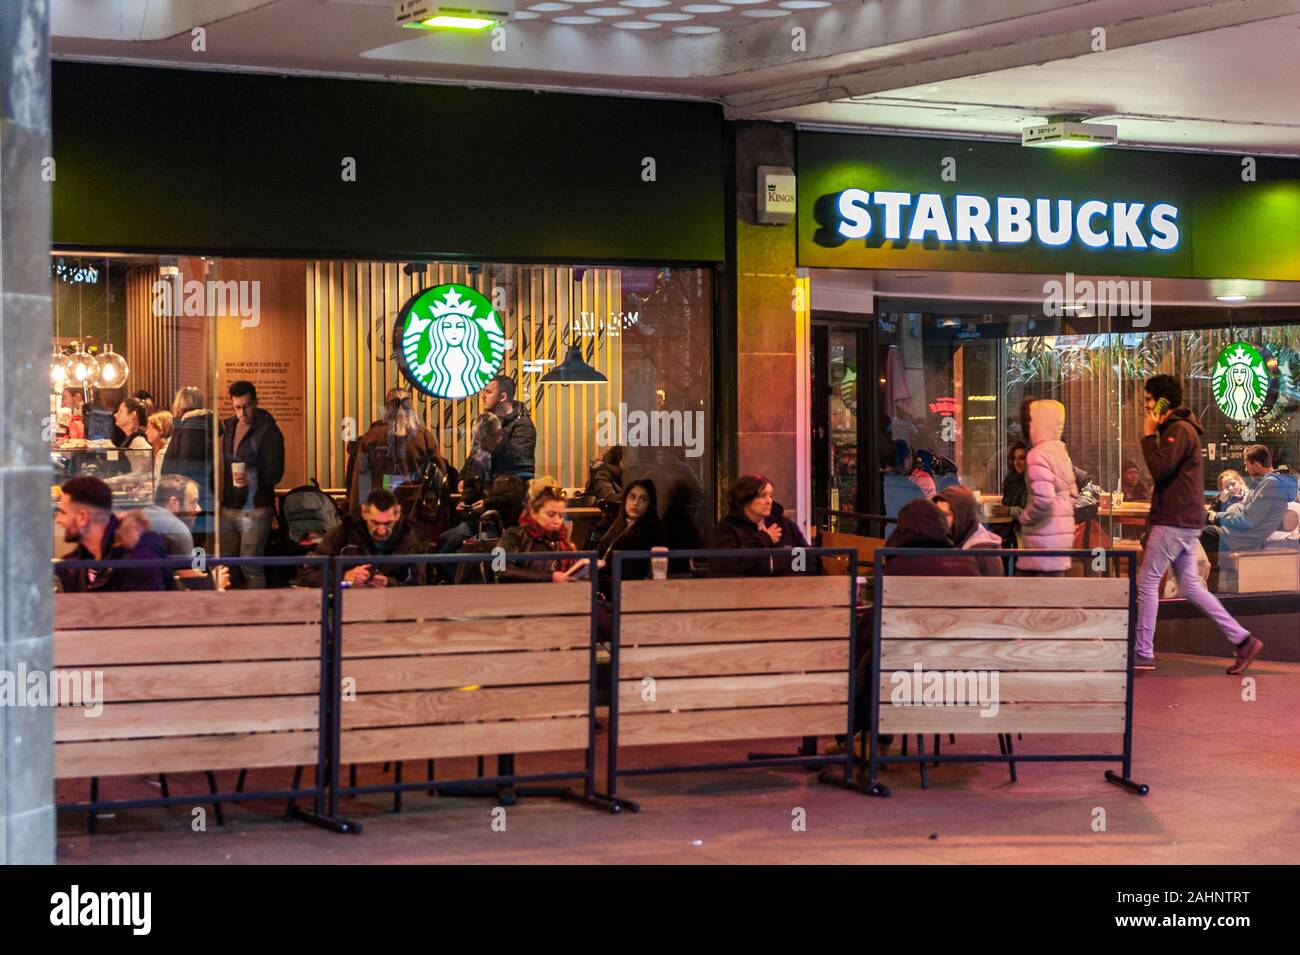 Starbucks Coffee Shop in Broadgate, Coventry, West Midlands, UK. Stock Photo